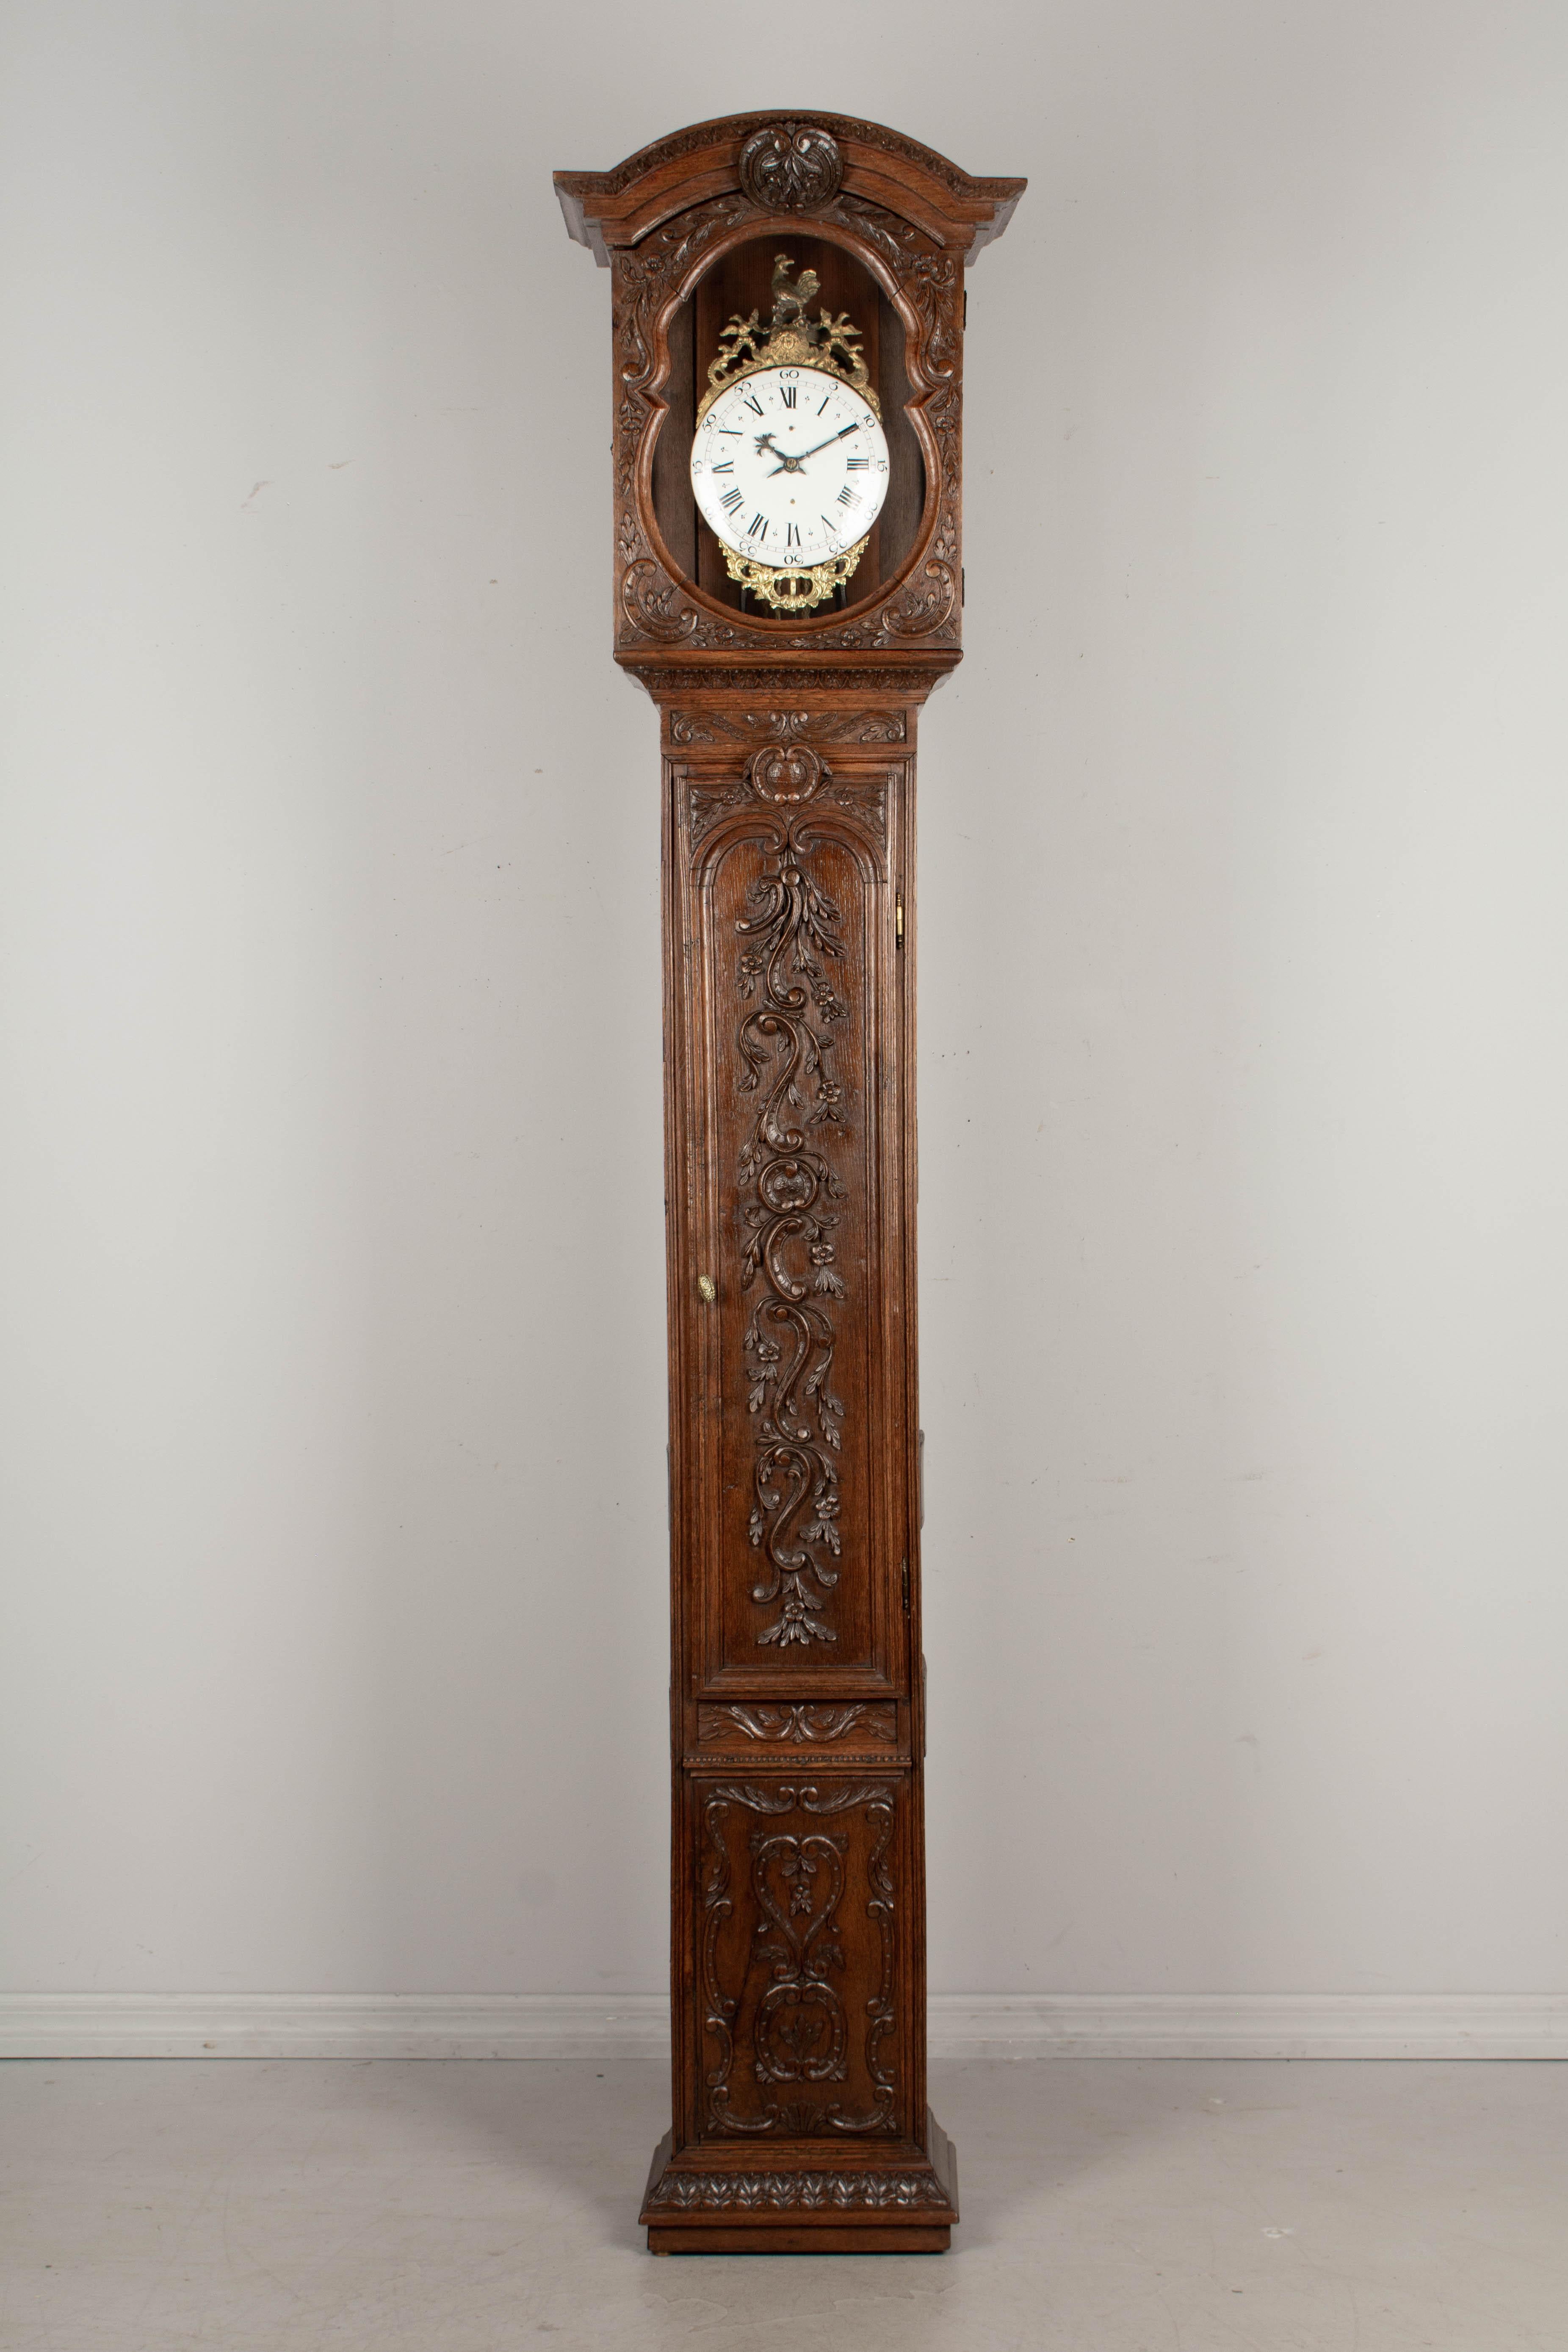 An 18th century tall case clock from Normandy. The case is made of oak with beautiful floral carved relief and waxed patina. Cast brass clock surround with rooster. The 18th century one day movement has been professionally cleaned and is in working